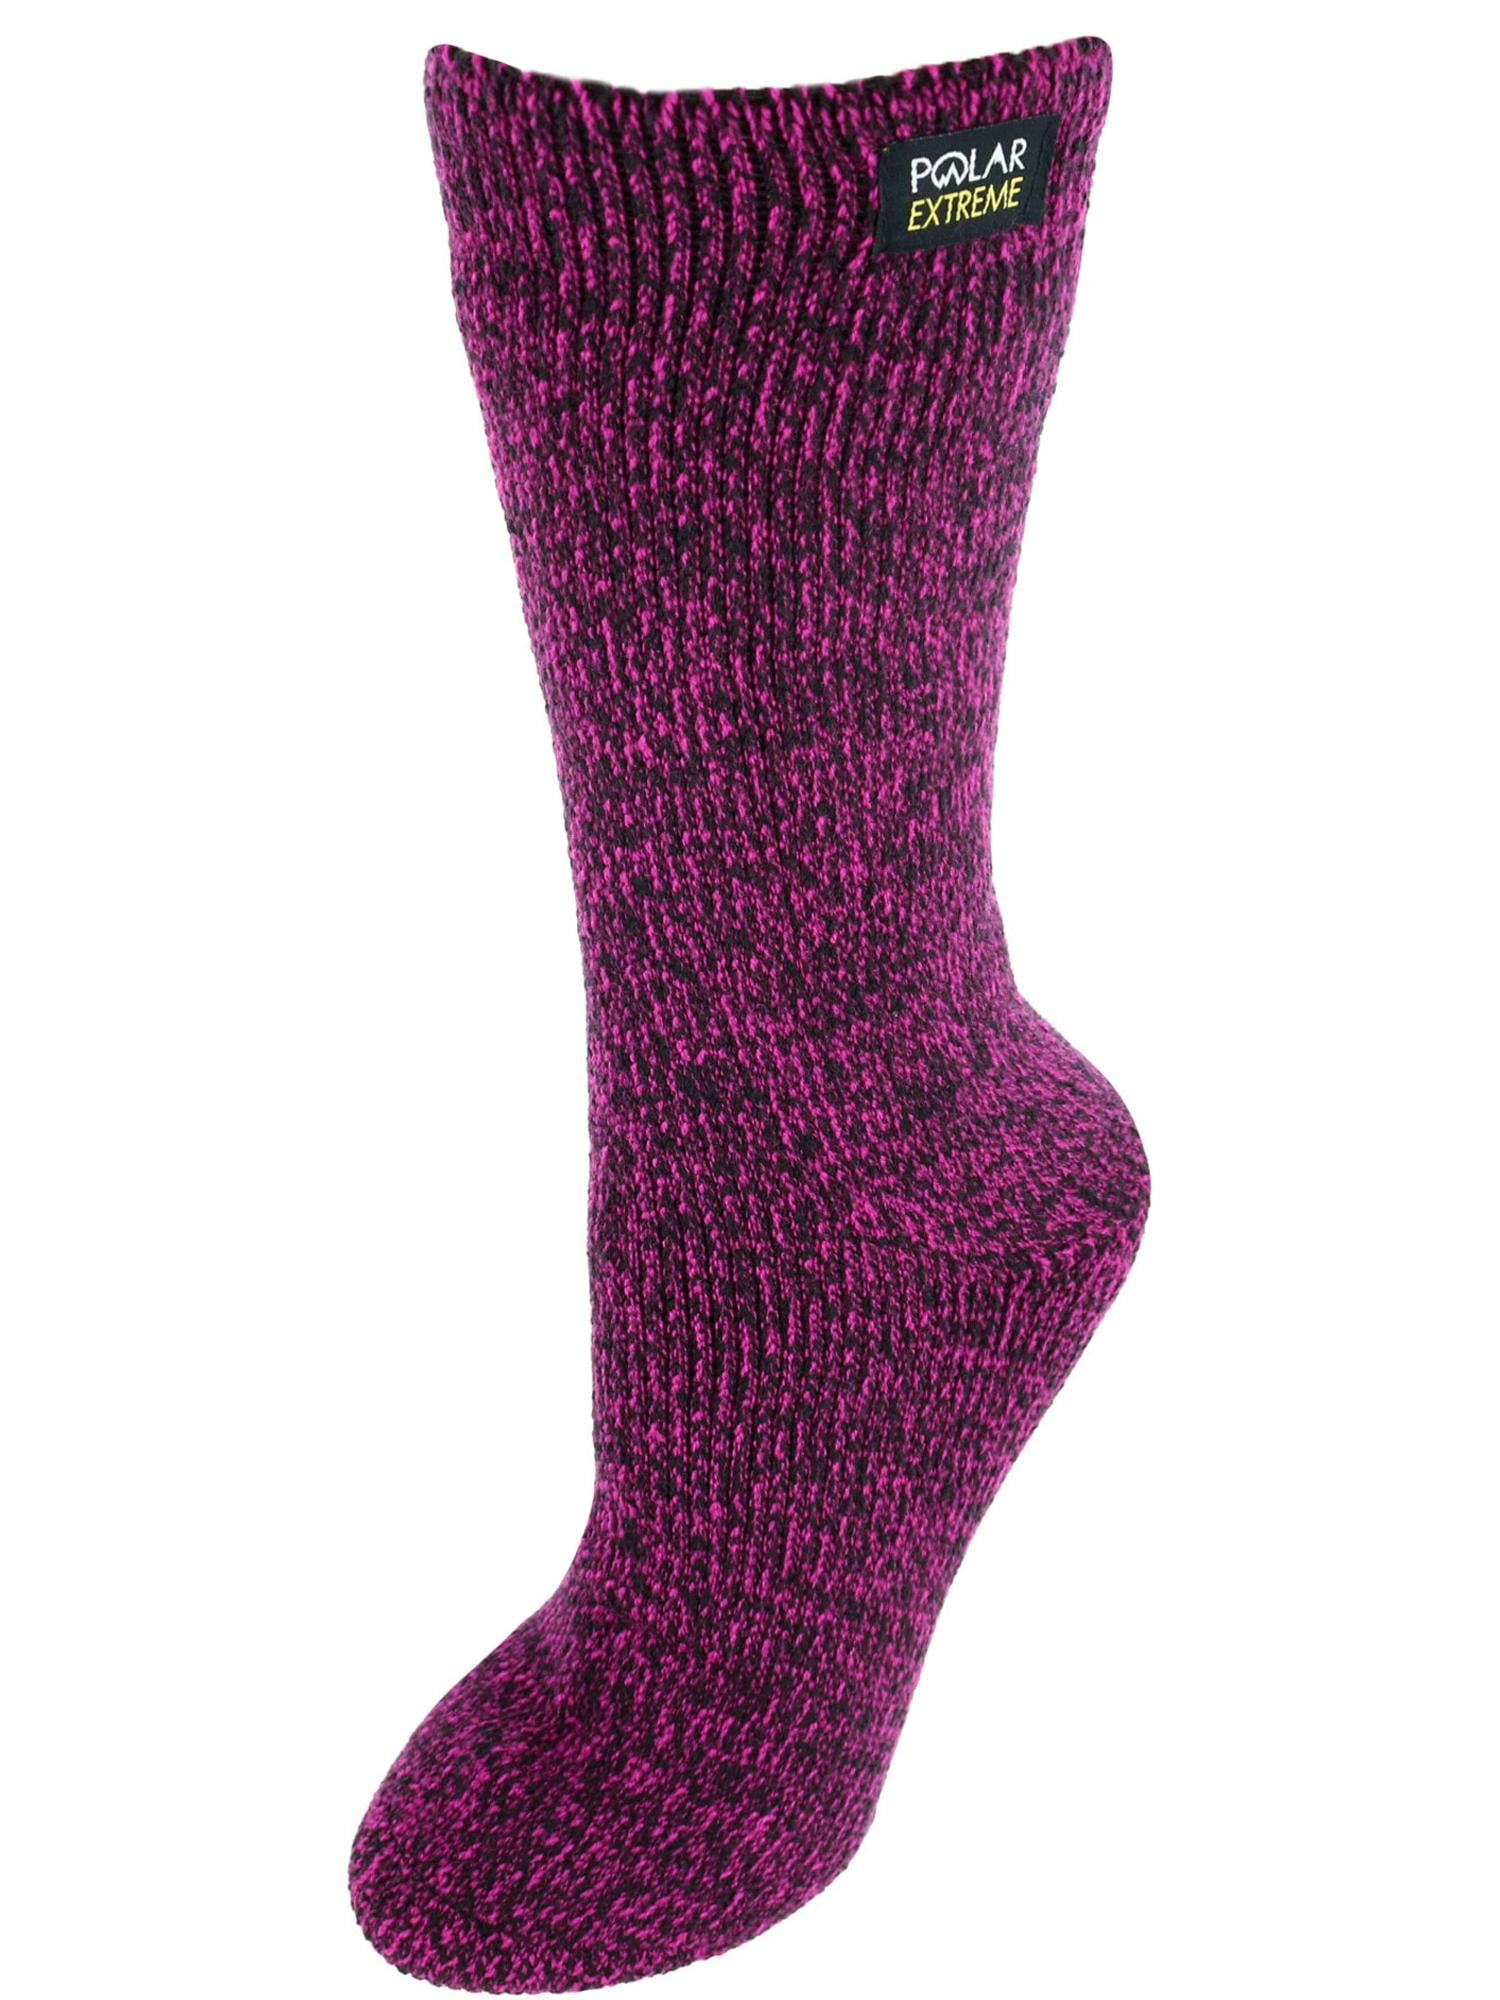 Polar Extreme Marled Insulated Thermal Socks with Fleece Lining (Women) 